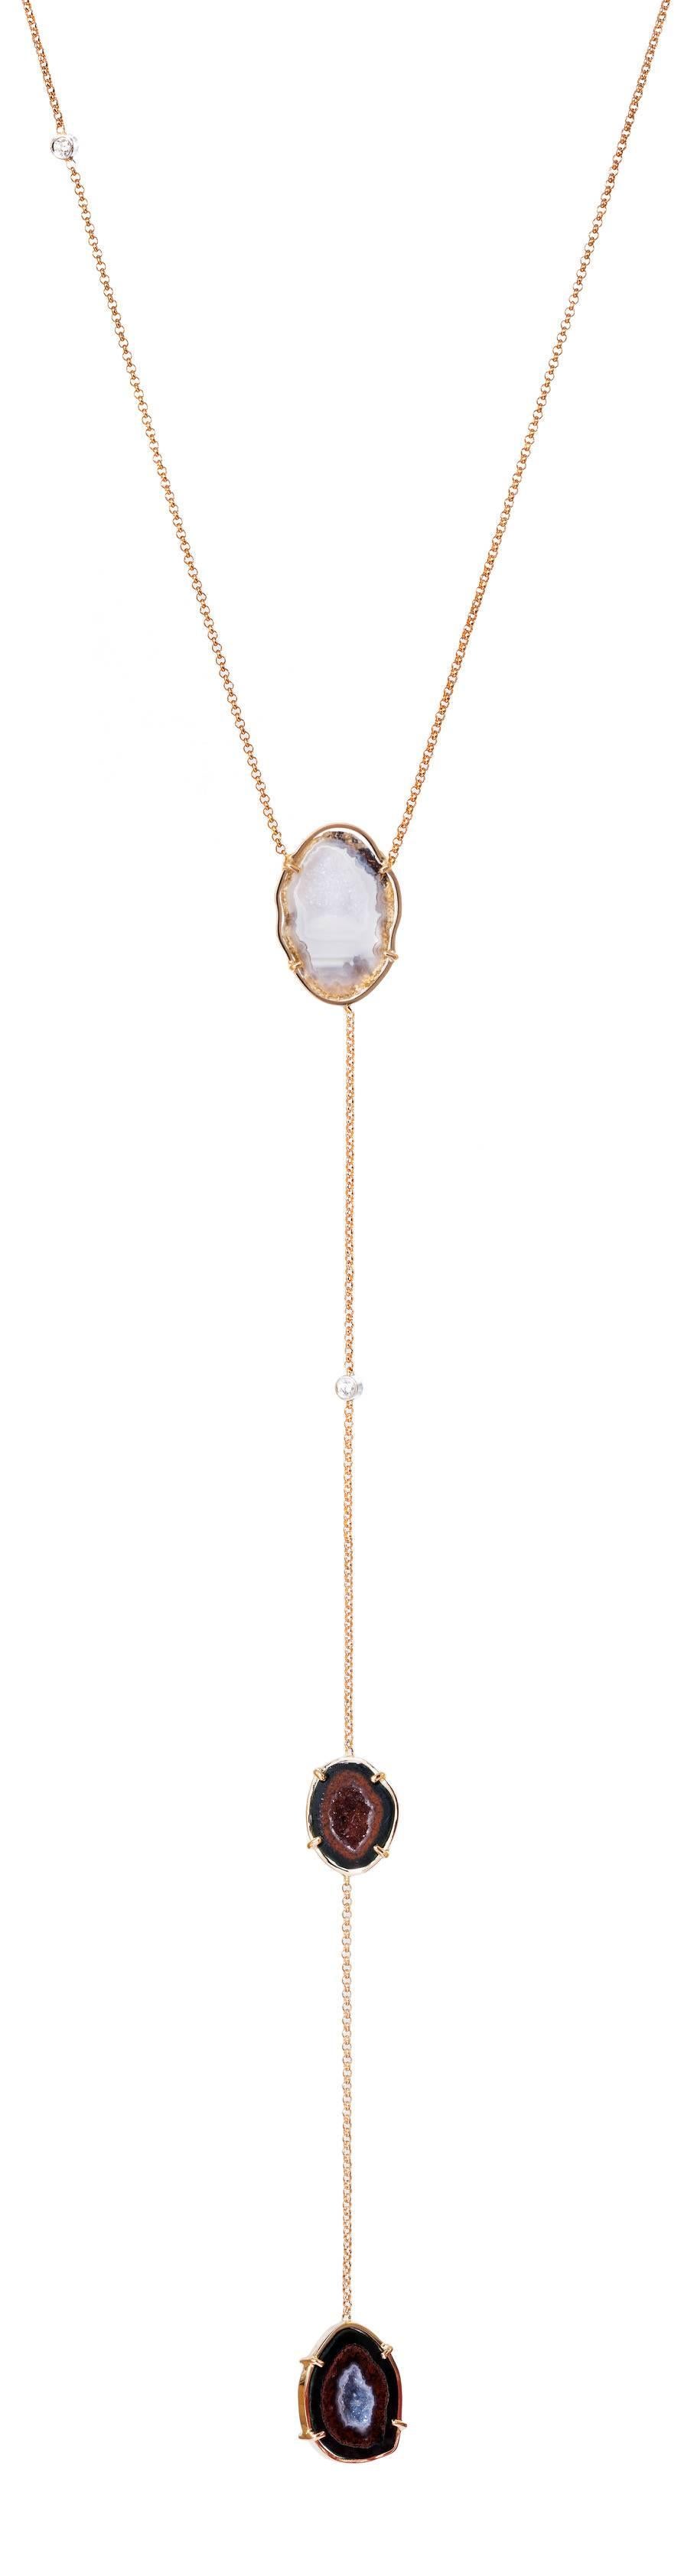 This 18 k rose gold agate geode pendant has 0.1 ct of dazzling diamonds.
This is the perfect gift for yourself or a special person.
The chain is 50 cm and adjustable with a sliding ball system. The drop is 20 cm.
There are 2 little diamonds on the